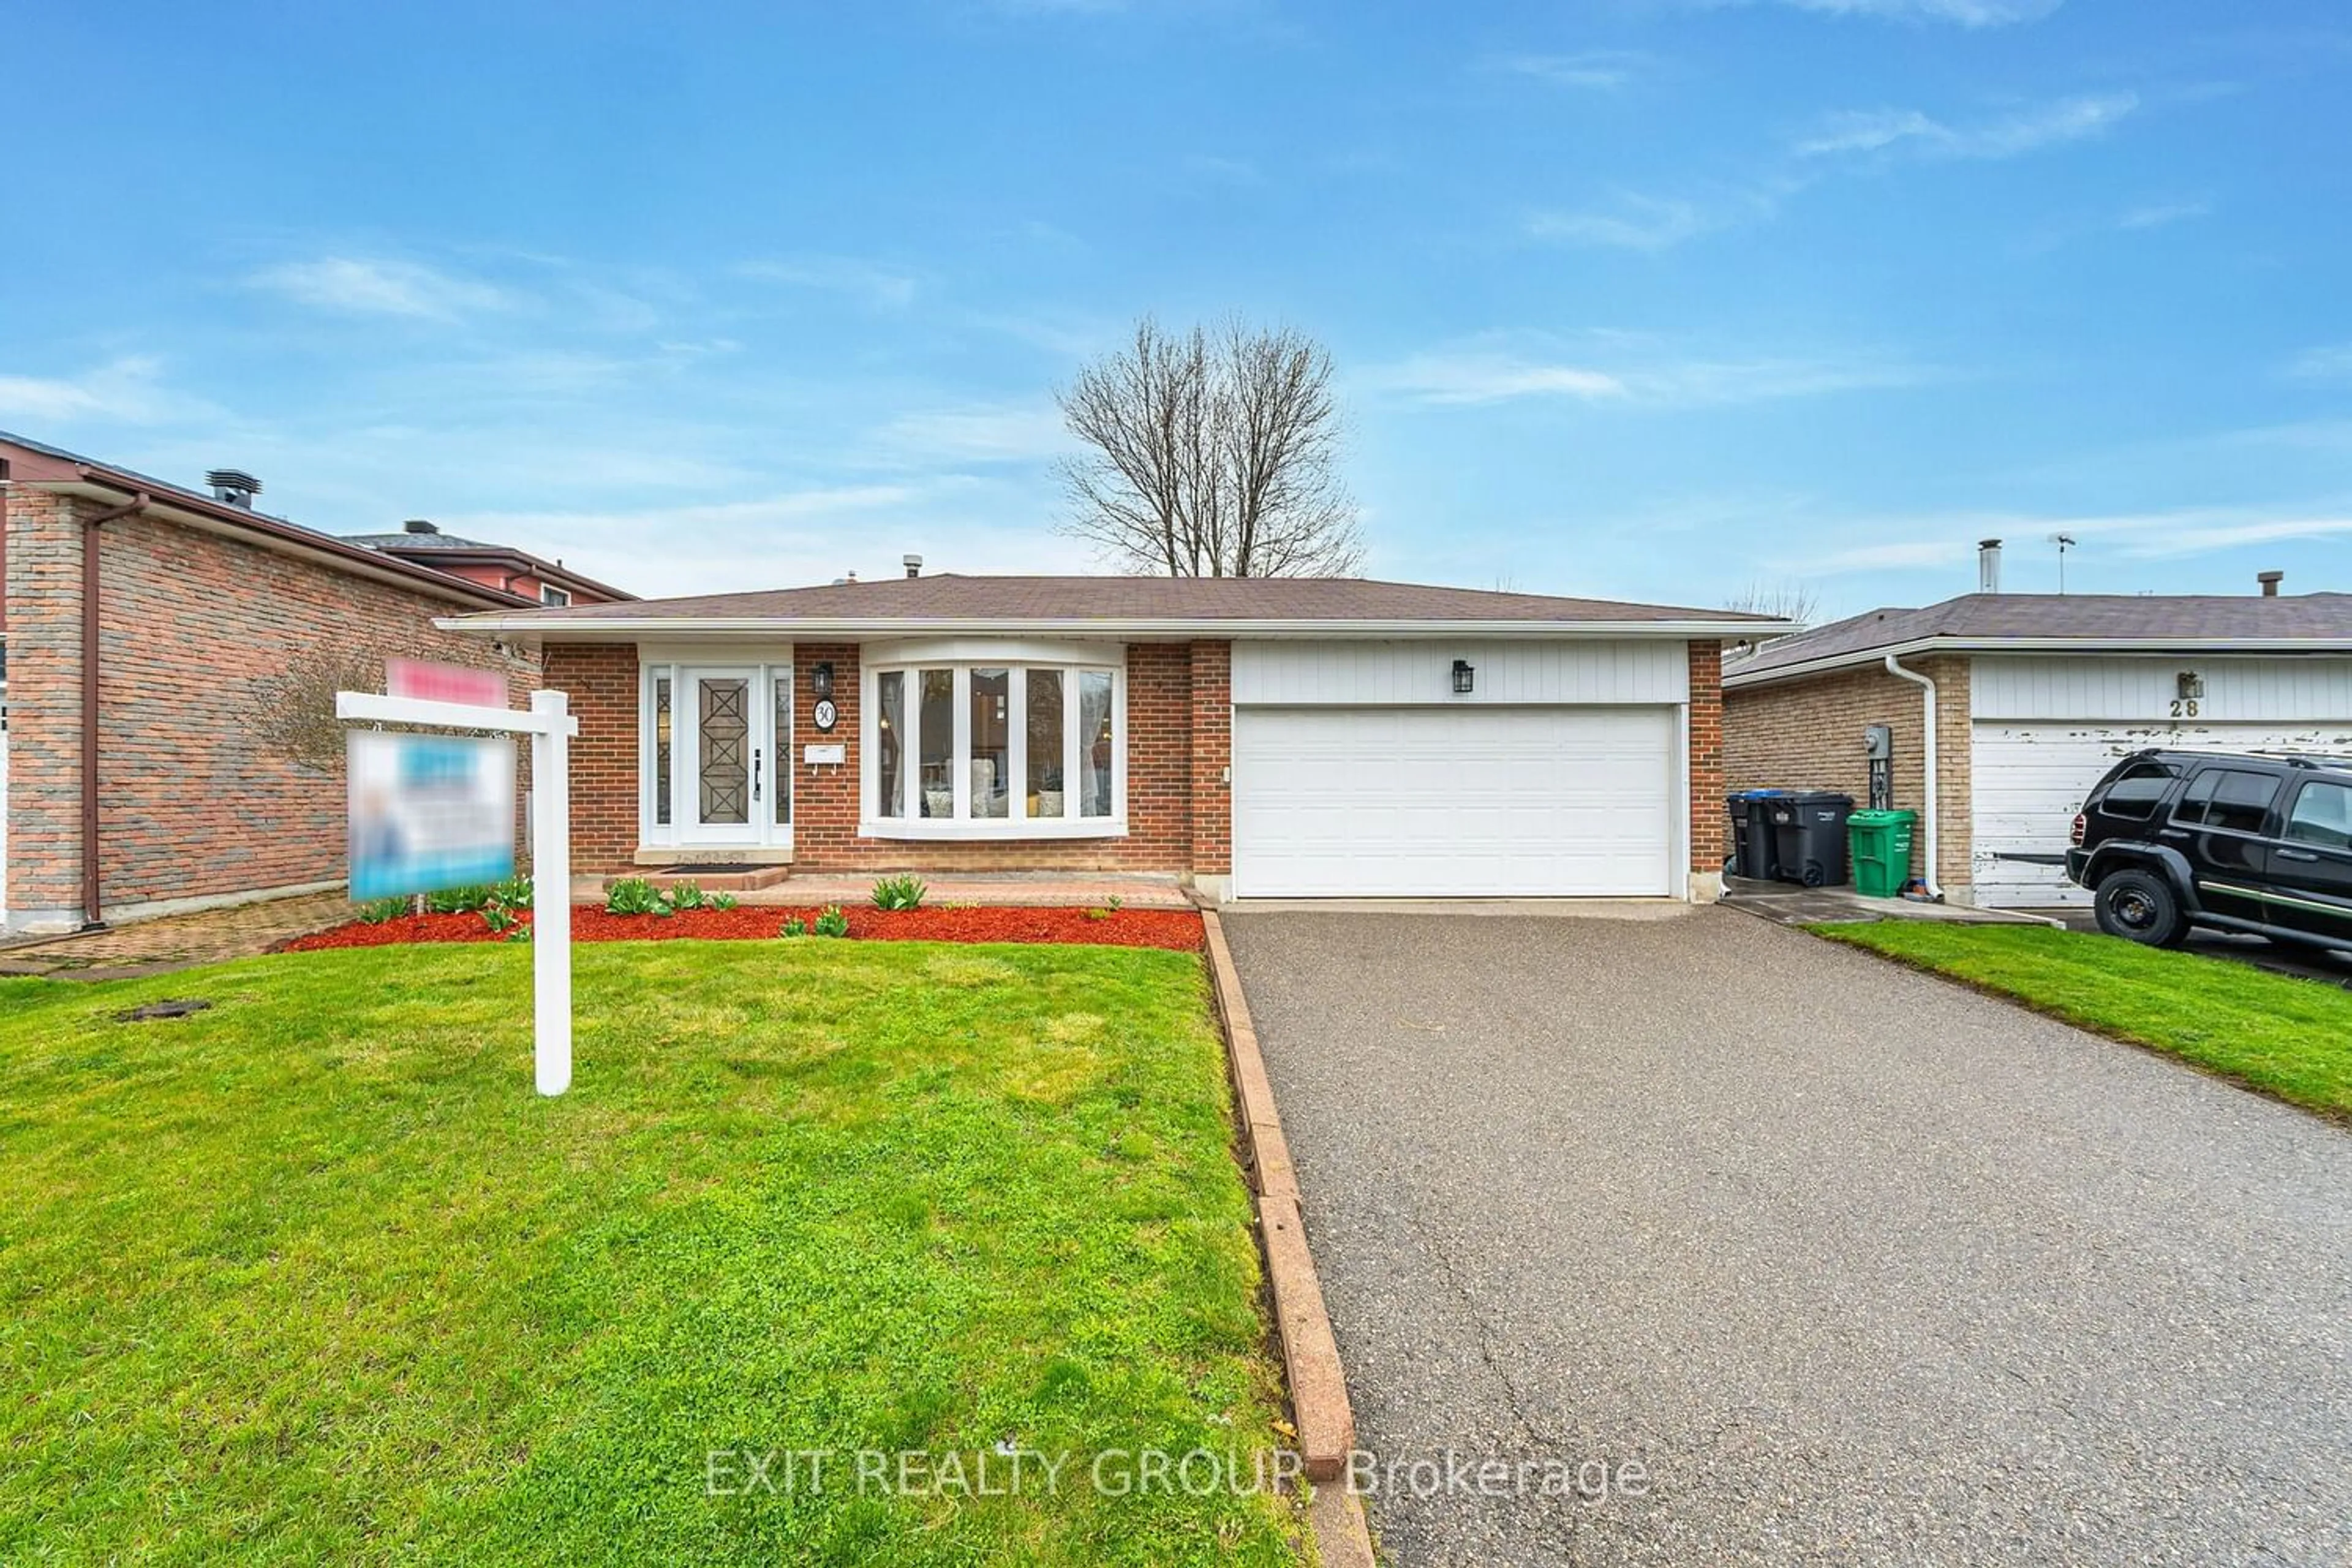 Frontside or backside of a home for 30 Pleasantview Ave, Brampton Ontario L6X 2M9